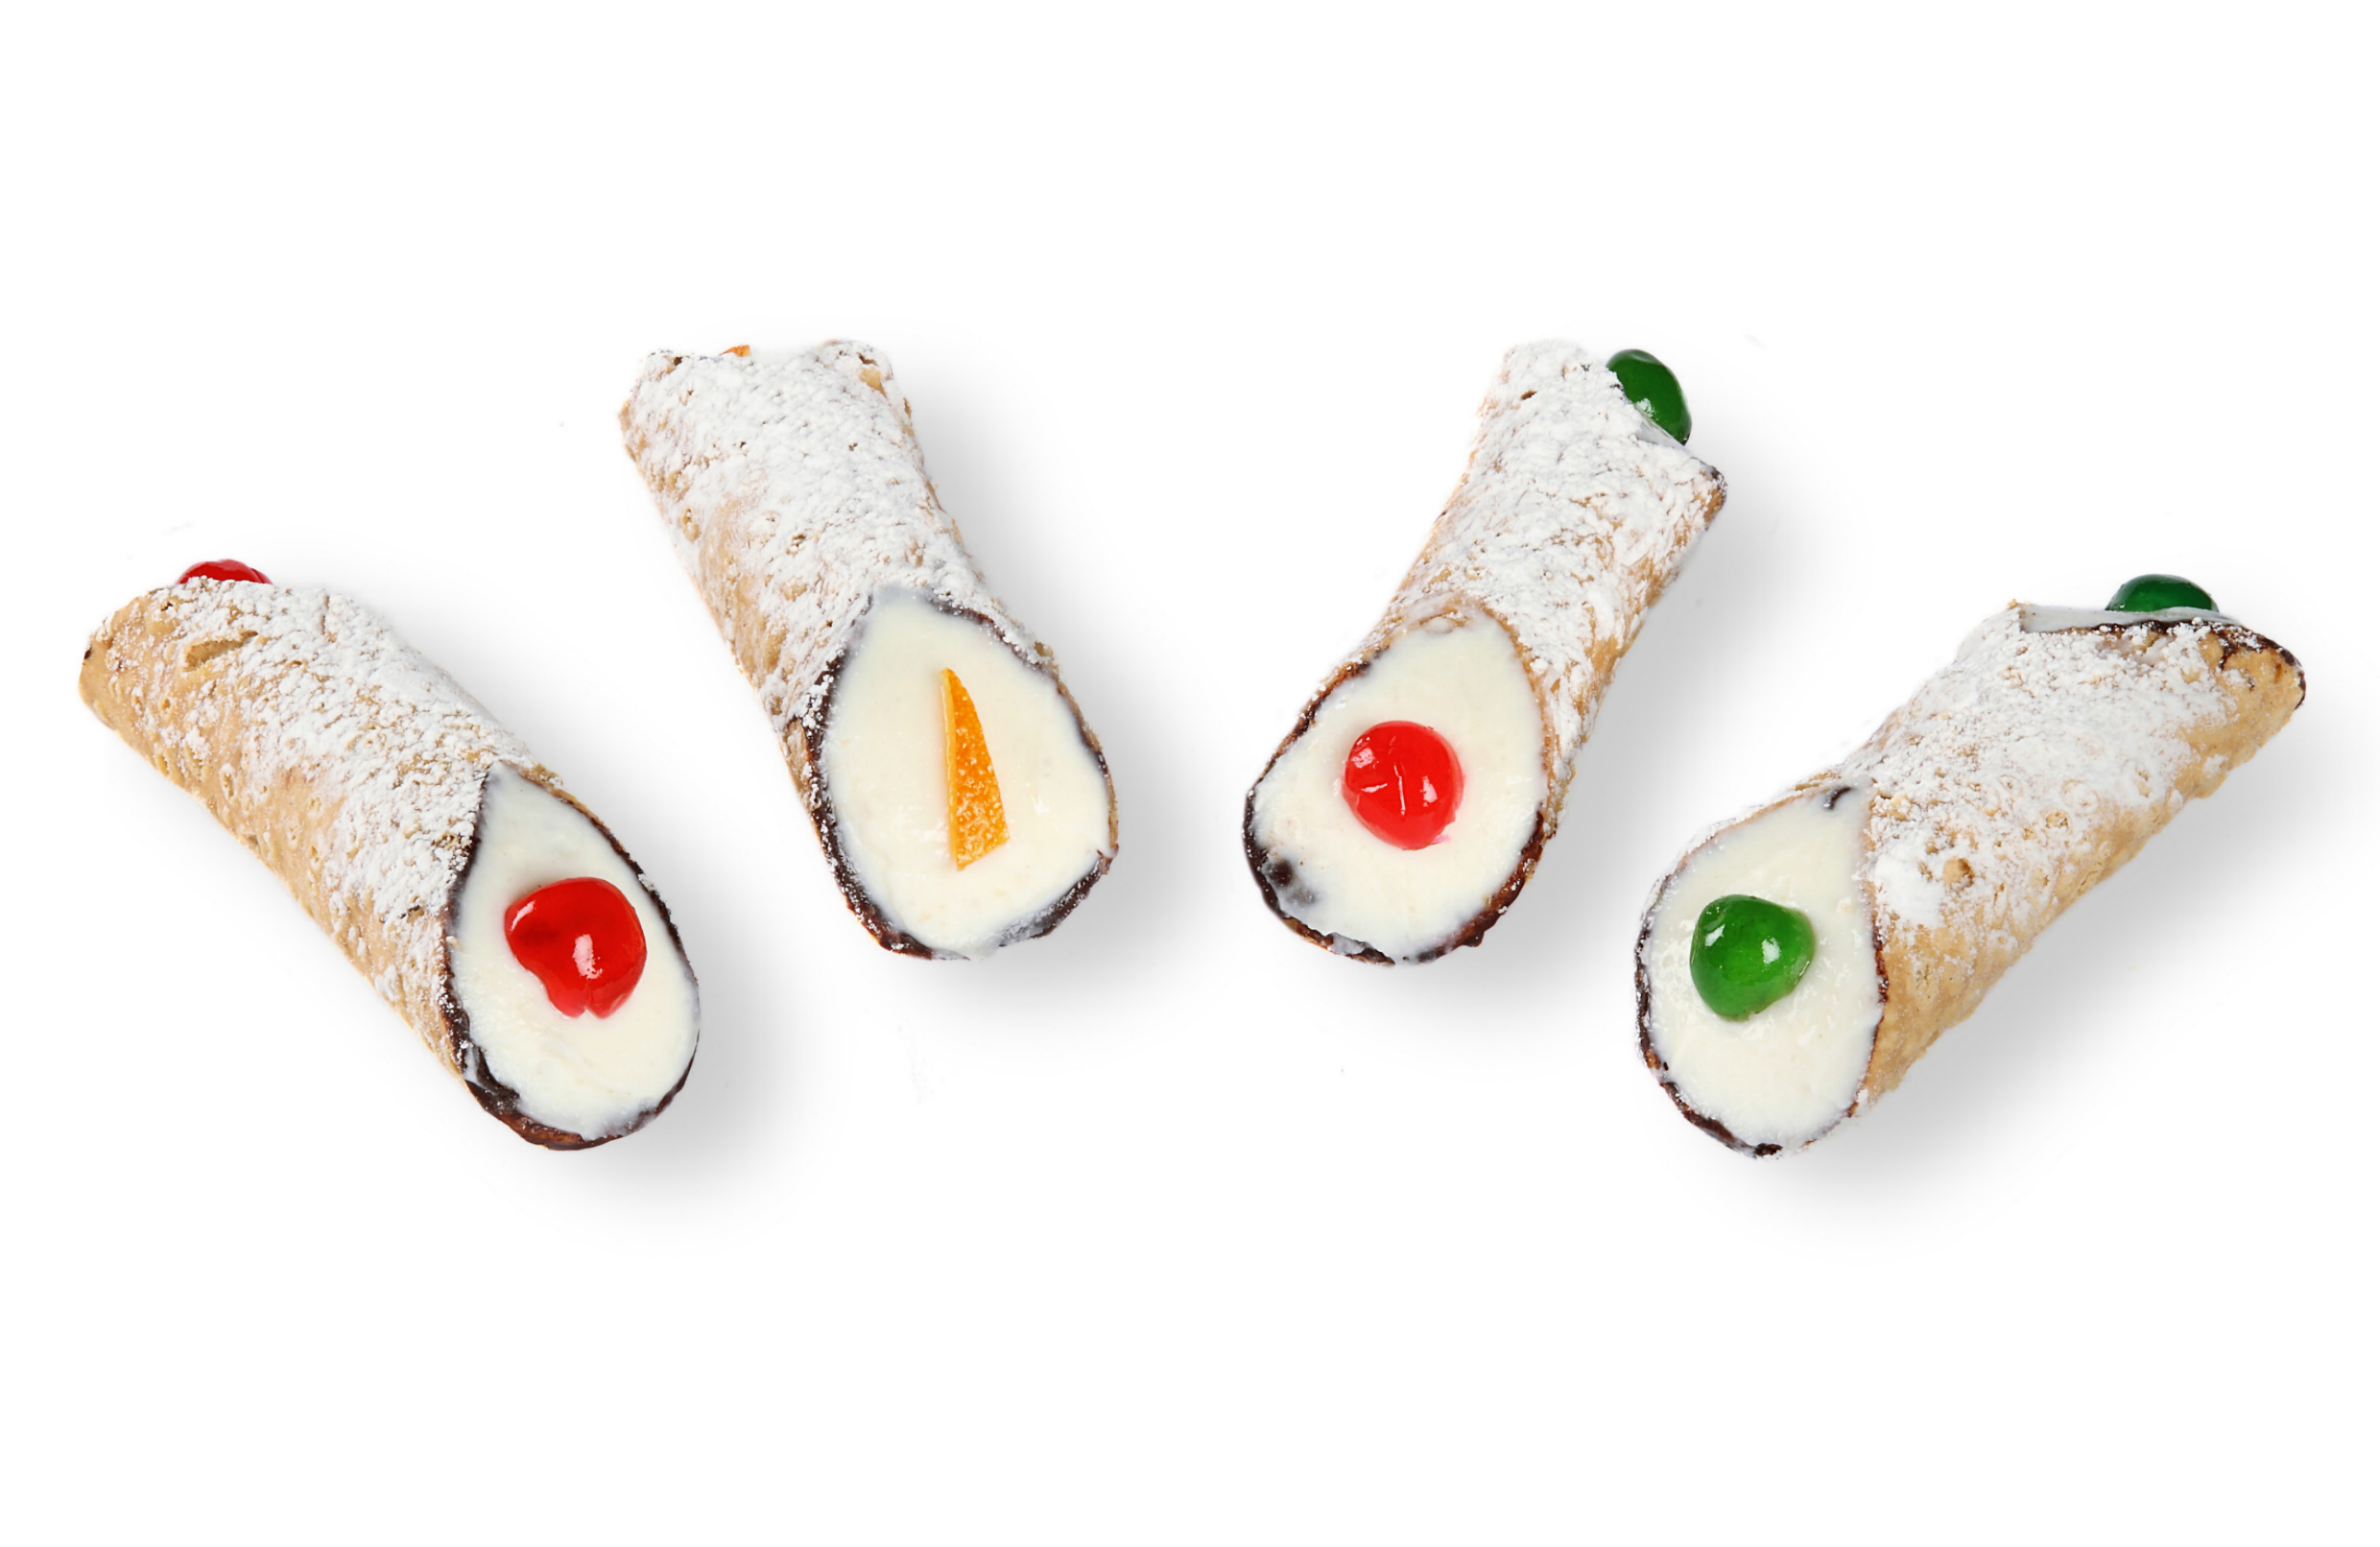 Sicilian cannolo coated with chocolate